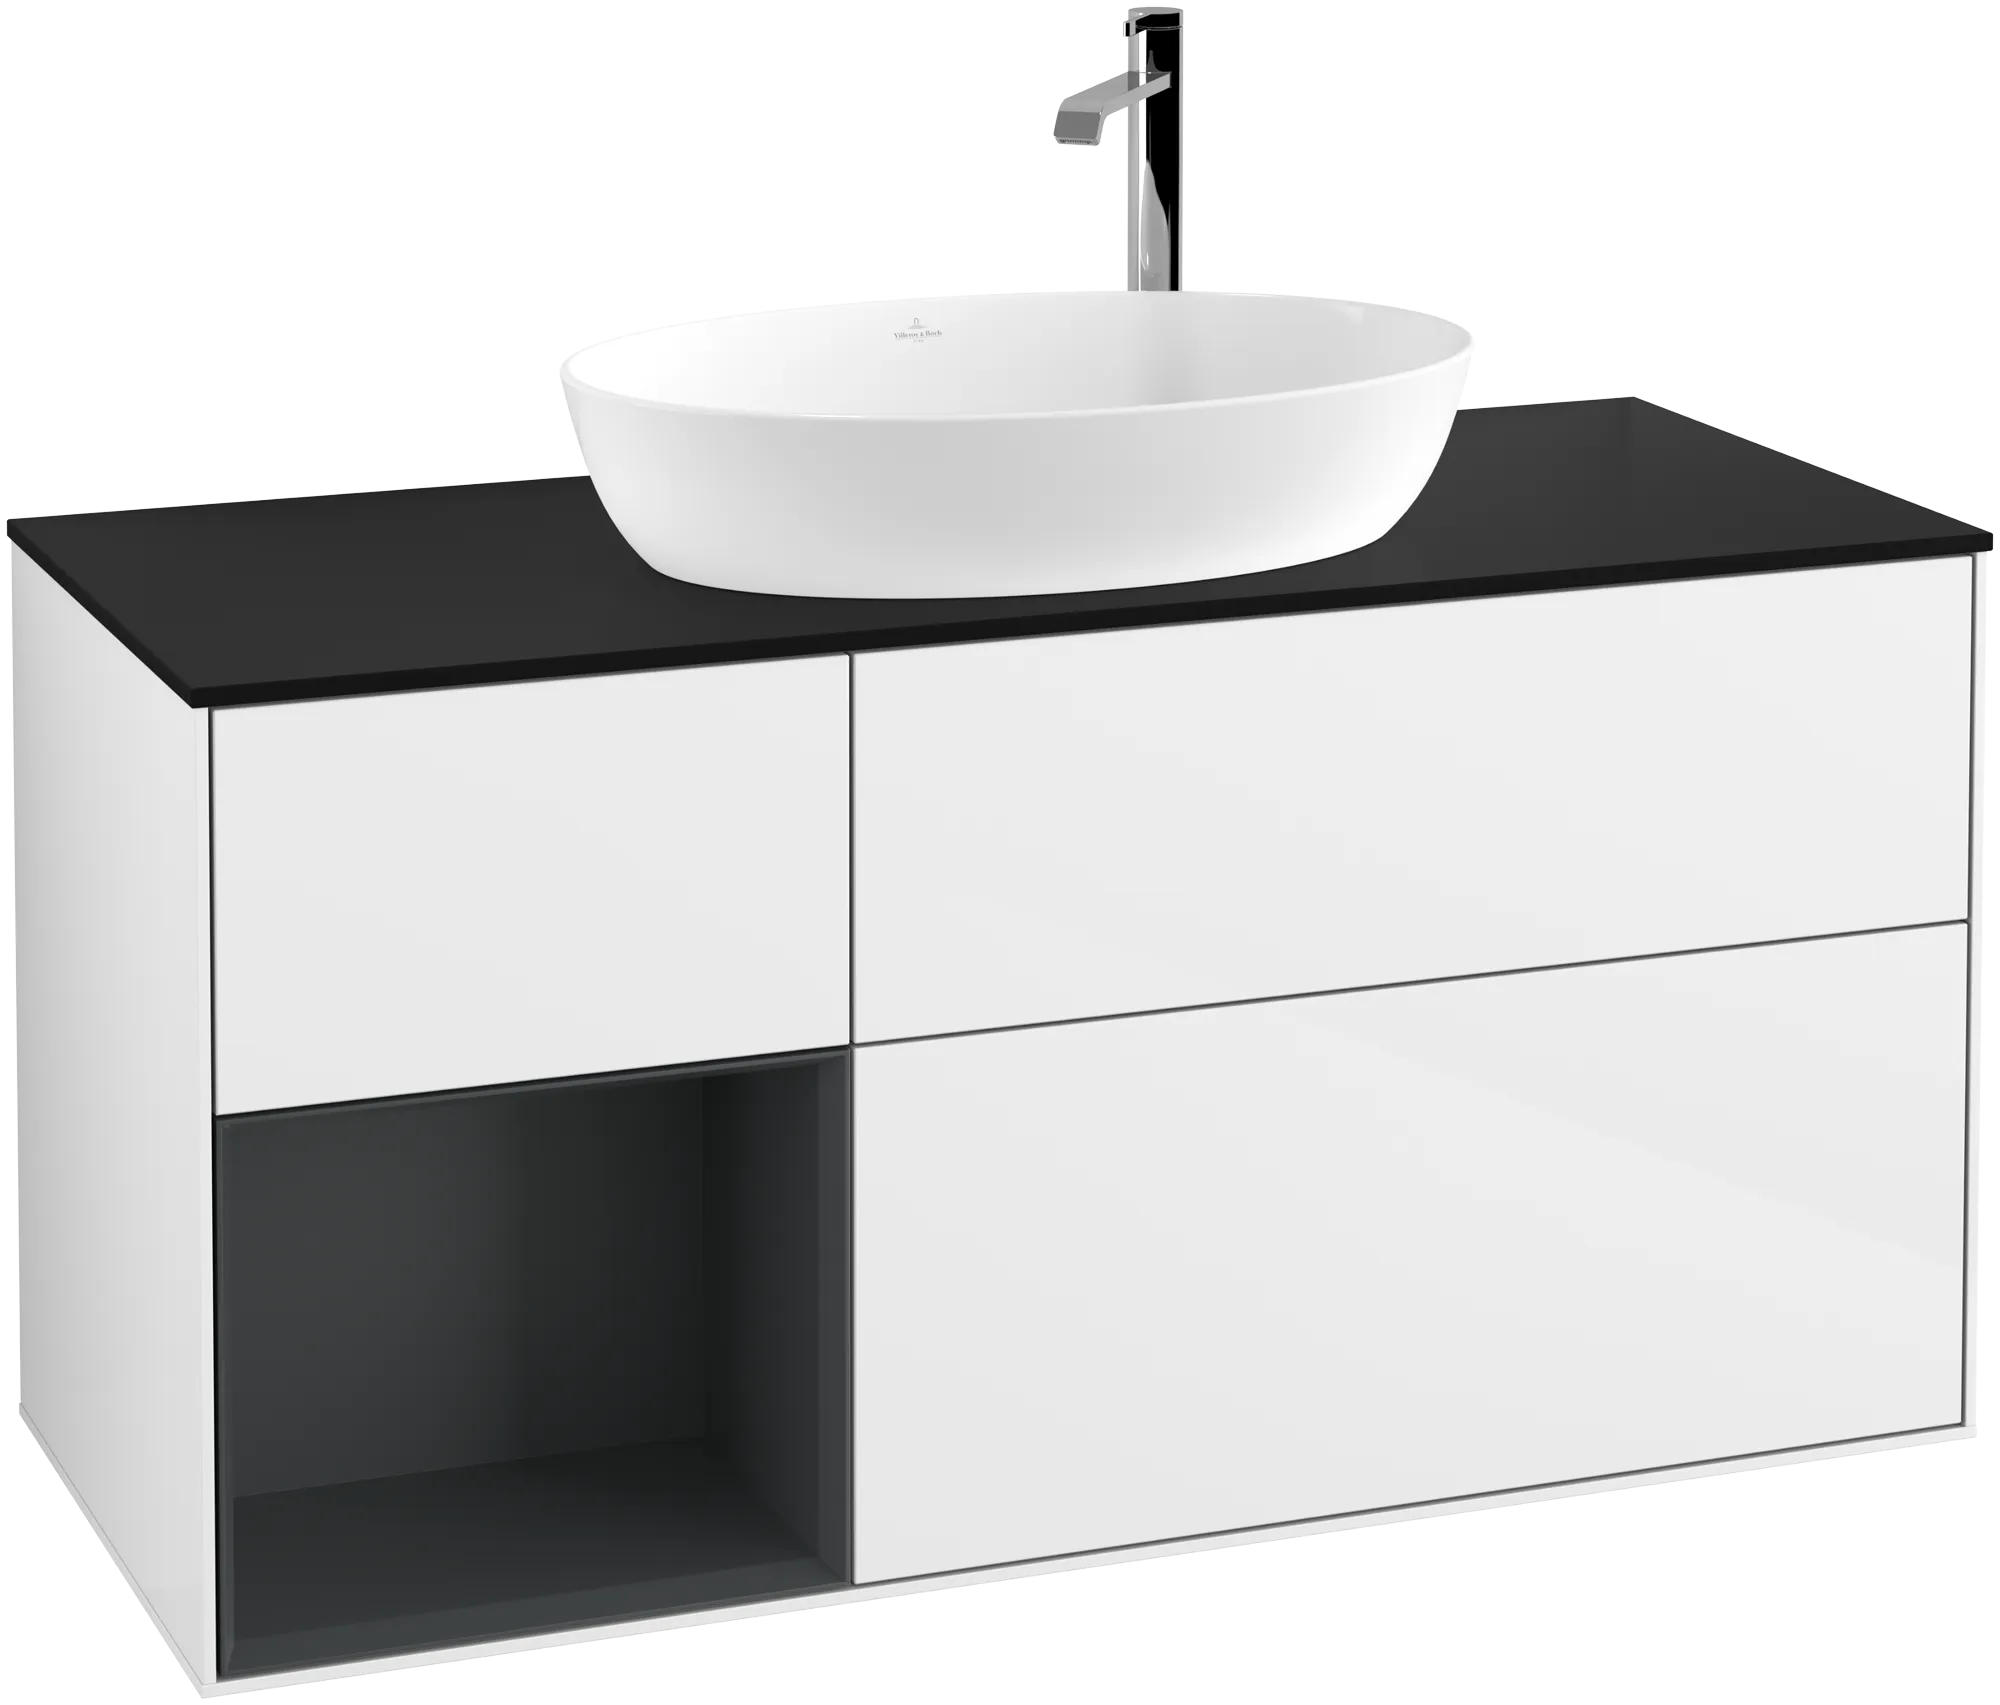 Obrázek VILLEROY BOCH Finion Vanity unit, with lighting, 3 pull-out compartments, 1200 x 603 x 501 mm, Glossy White Lacquer / Midnight Blue Matt Lacquer / Glass Black Matt #G942HGGF